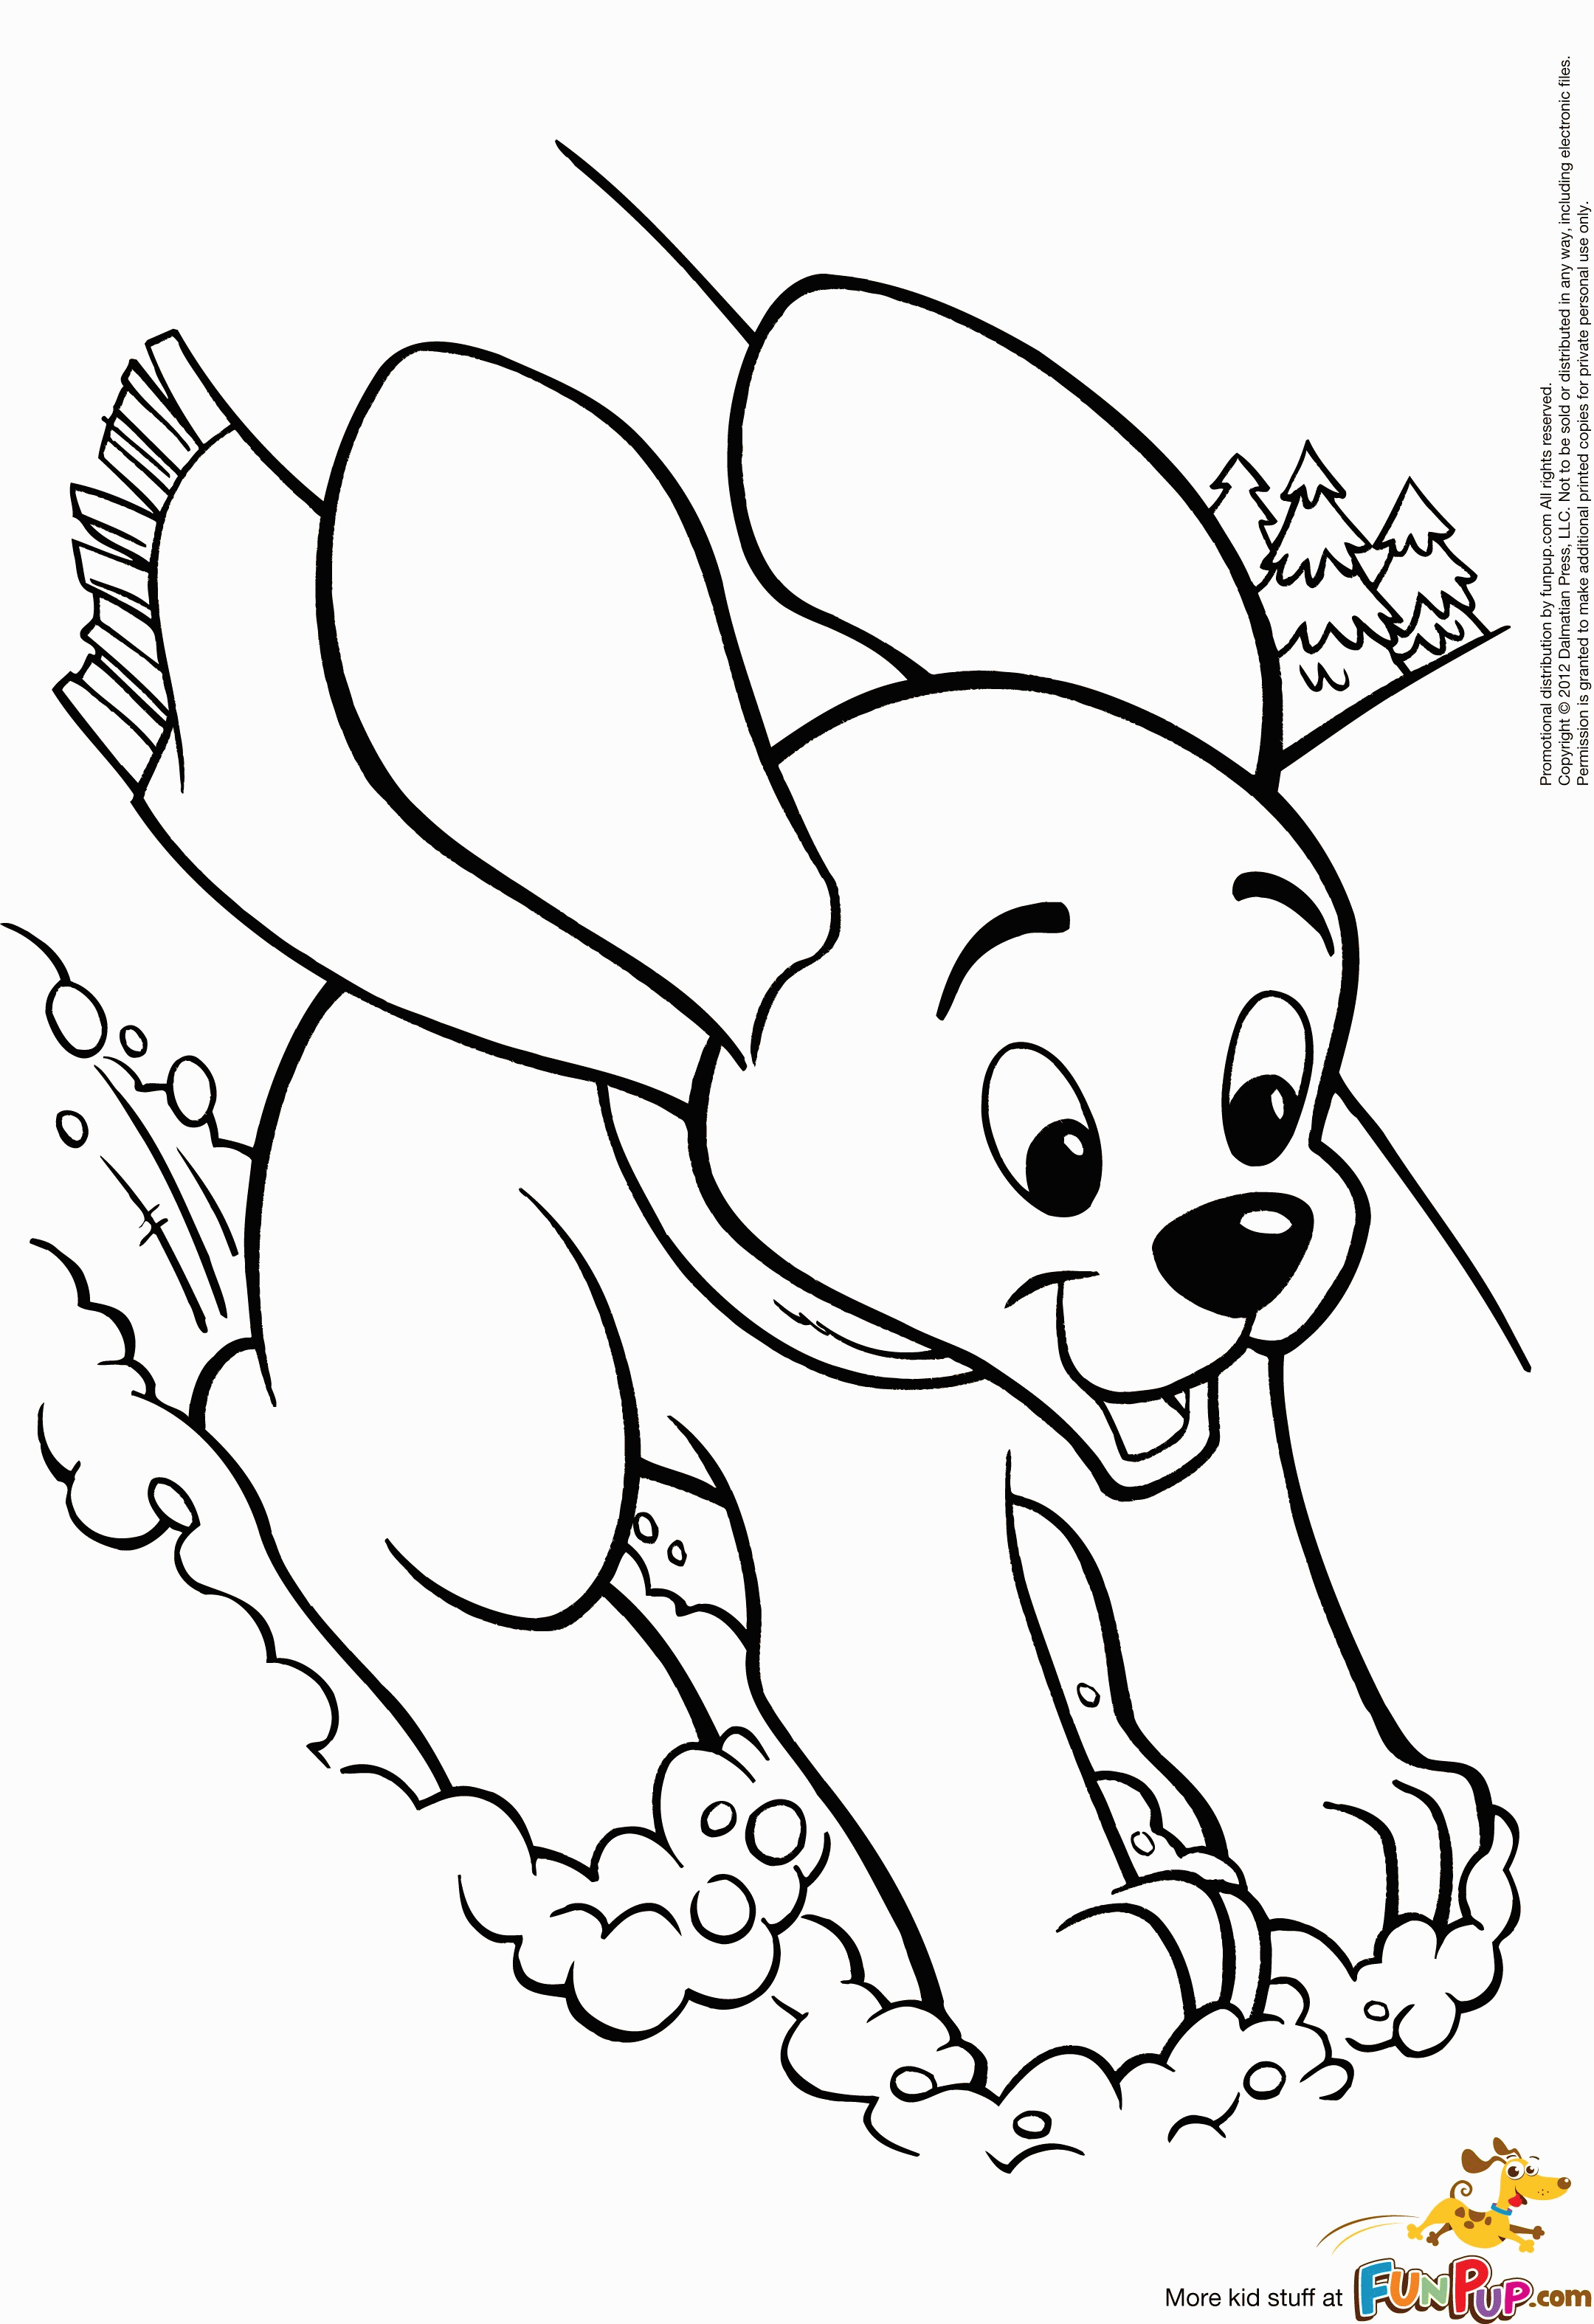 Coloring Page Of Puppies Coloring Home